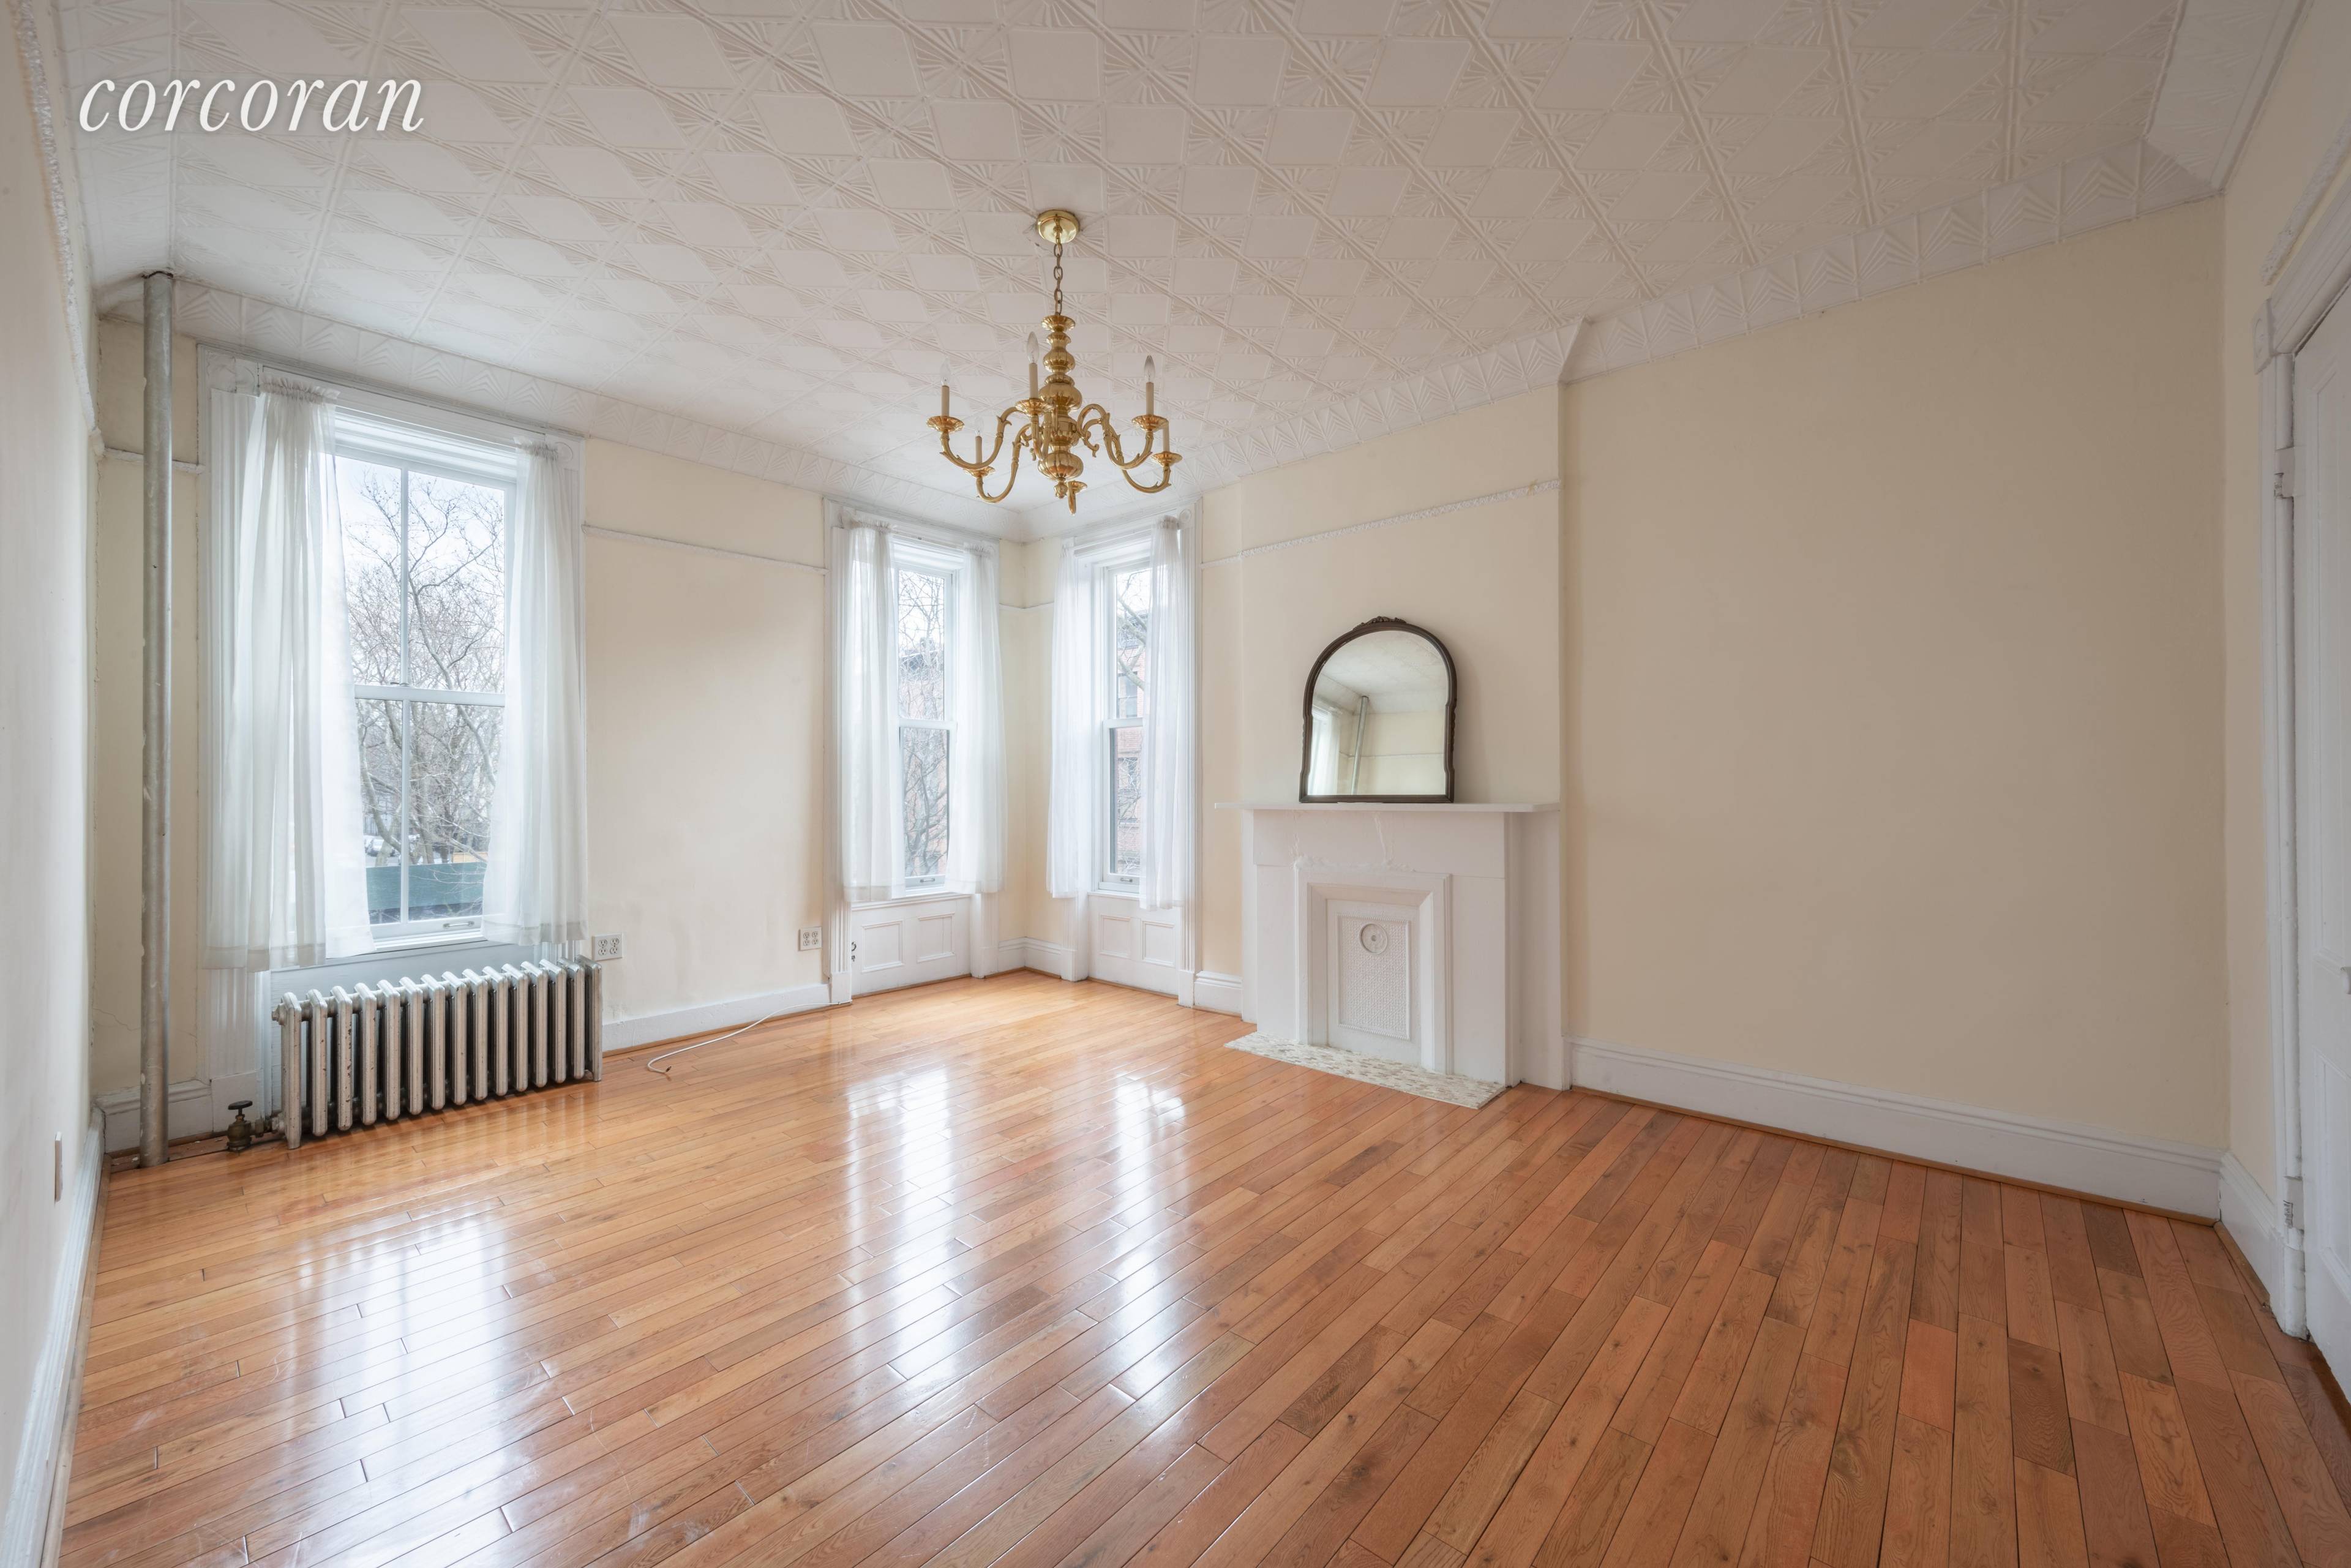 Welcome to 111 Pacific Street a massive, 4 bedroom floor through apartment in prime Cobble Hill.